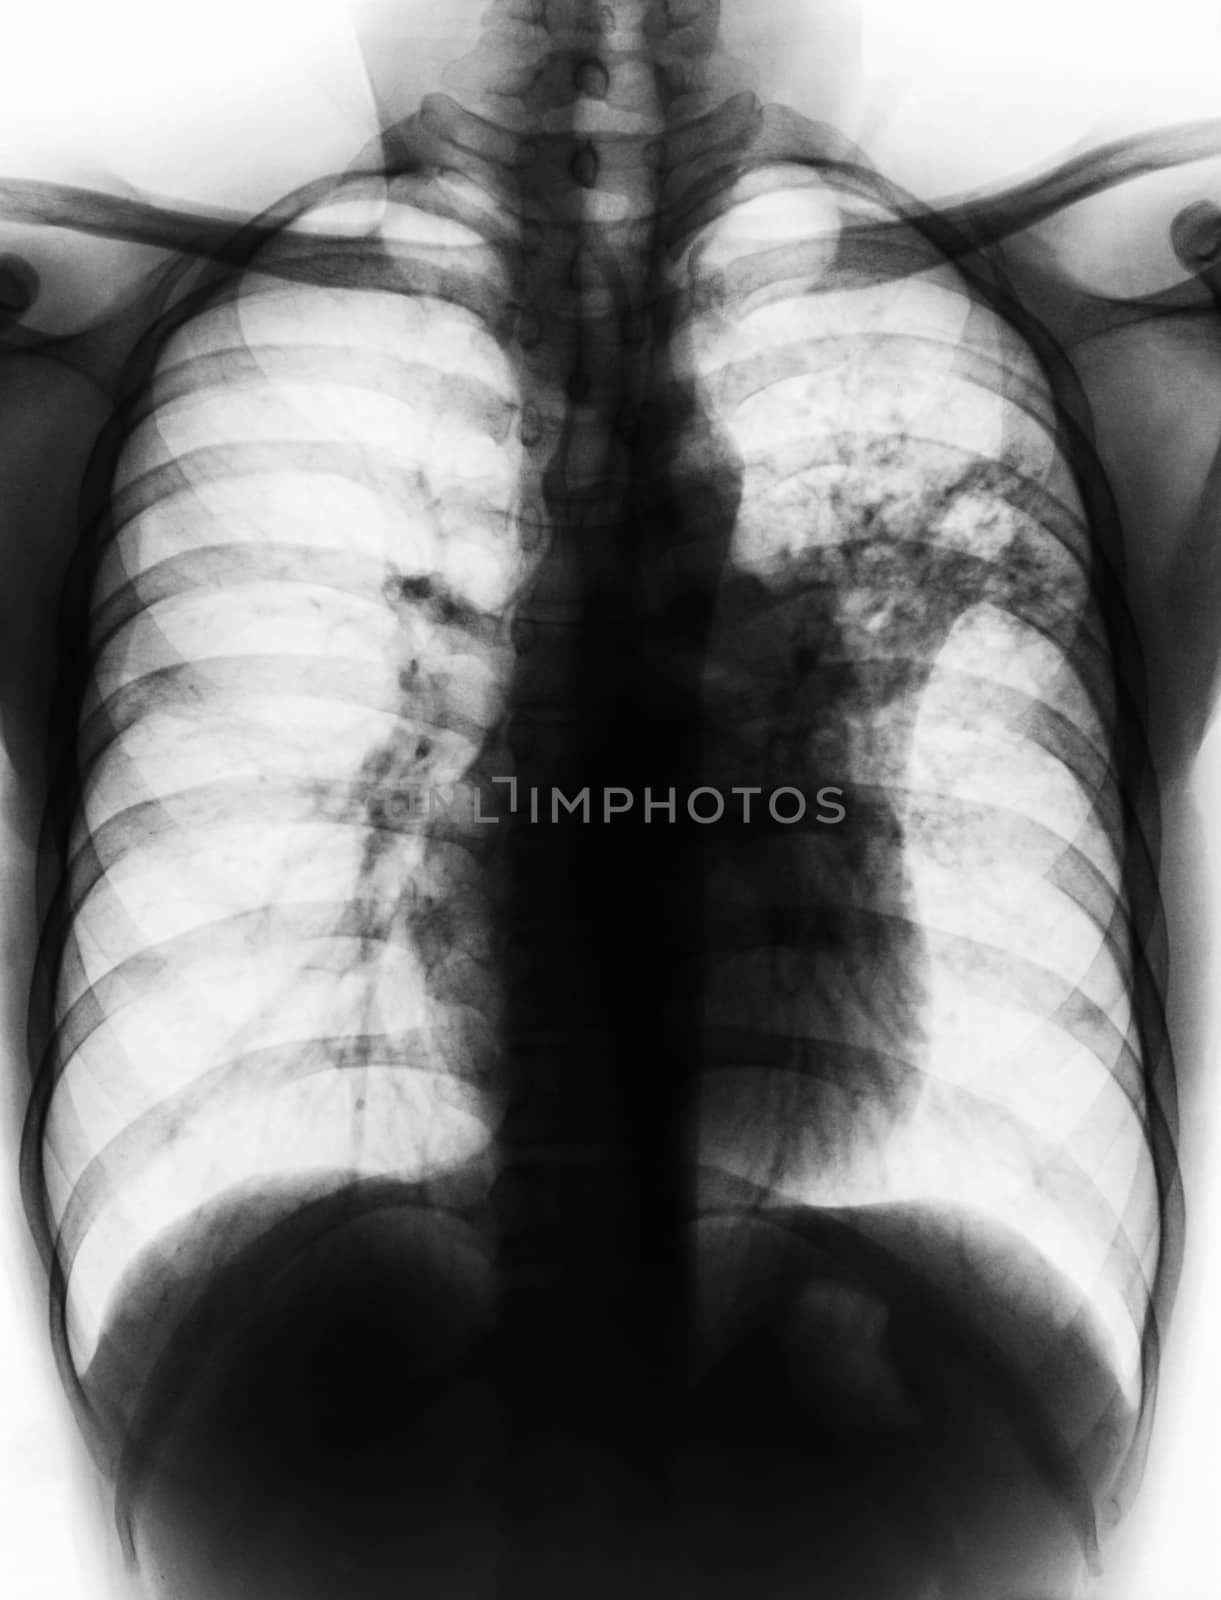 Pulmonary Tuberculosis . Film chest x-ray show alveolar infiltrate at left middle lung due to Mycobacterium tuberculosis infection .